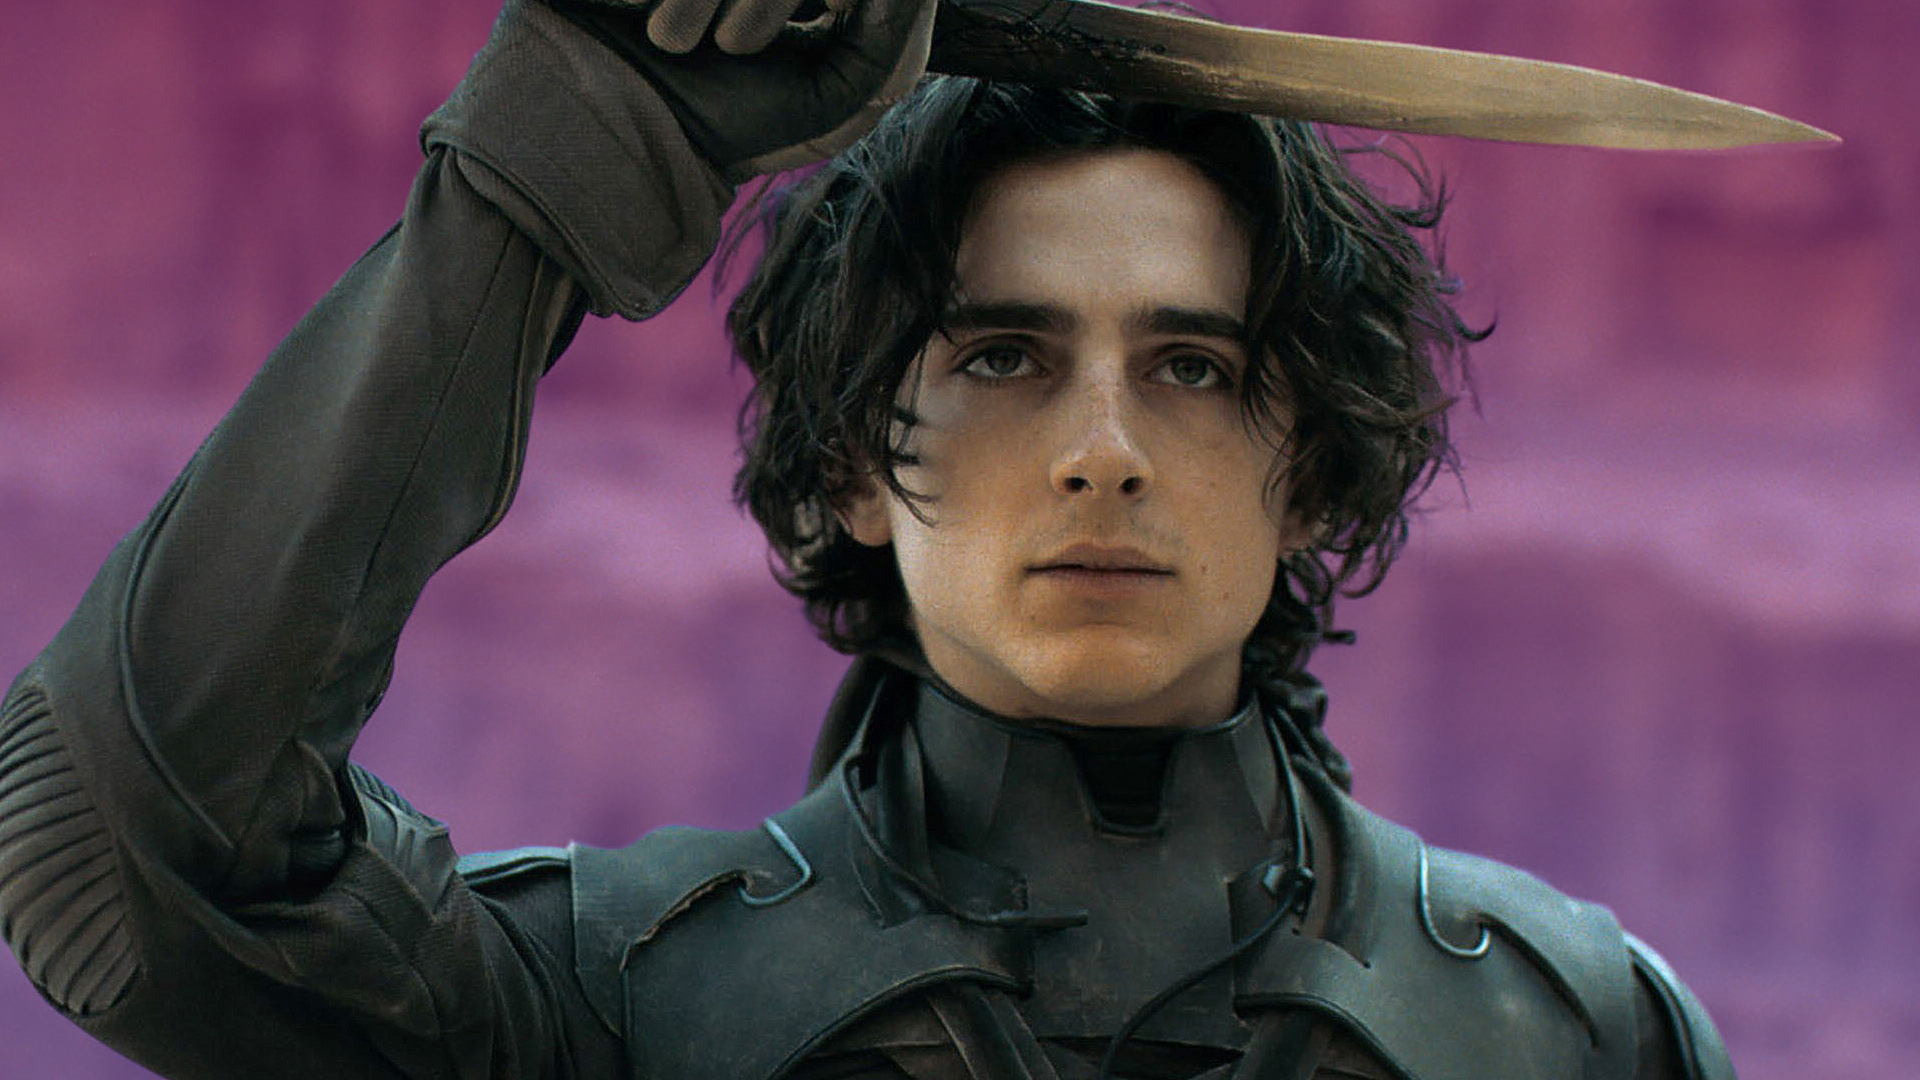 Timothée Chalamet as Paul Atreides in the movie Dune holds a knife to his forehead